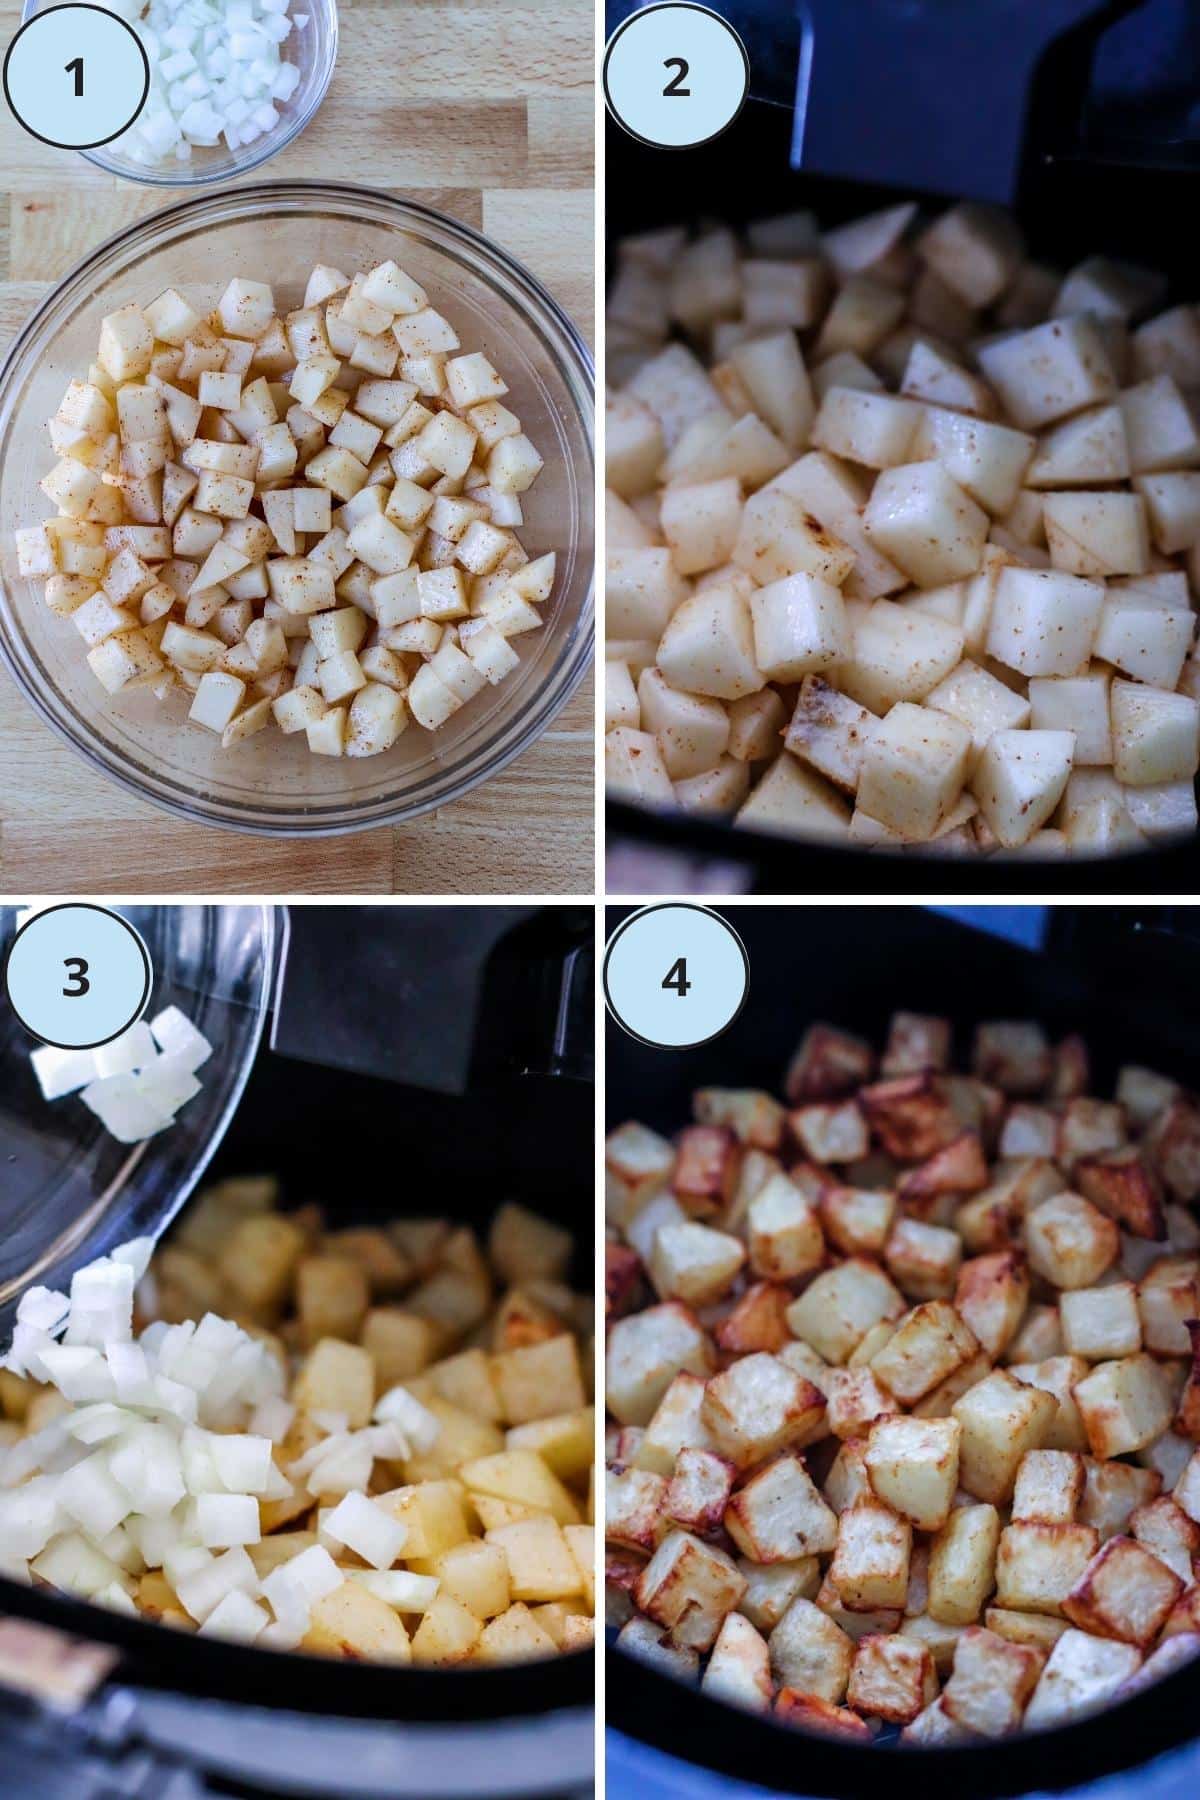 Collage of 4 numbered images showing how to make this recipe: Seasoning the potatoes, air frying the potatoes, adding diced onions, and the finished home fries in the air fryer basket.